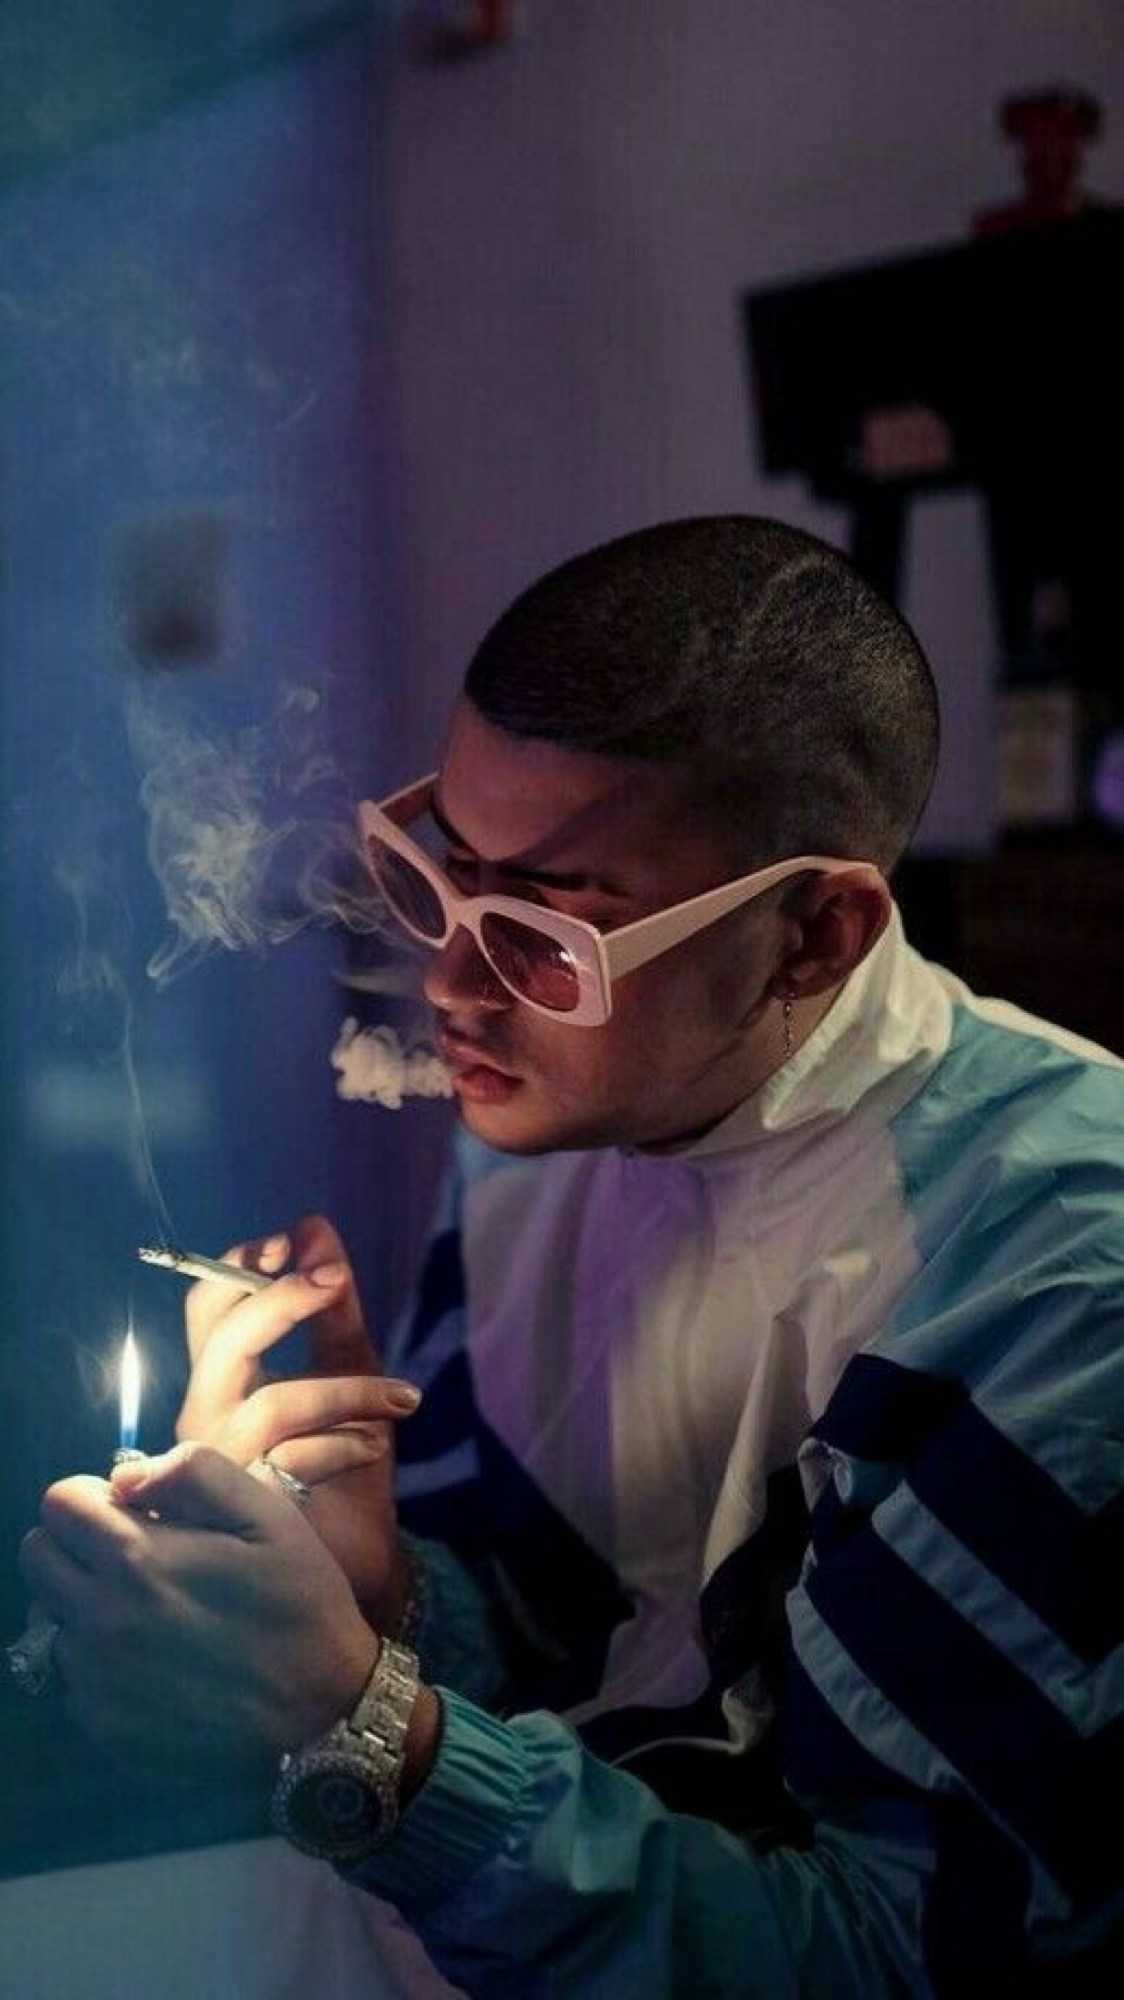 A man in sunglasses smoking while sitting at the table - Bad Bunny